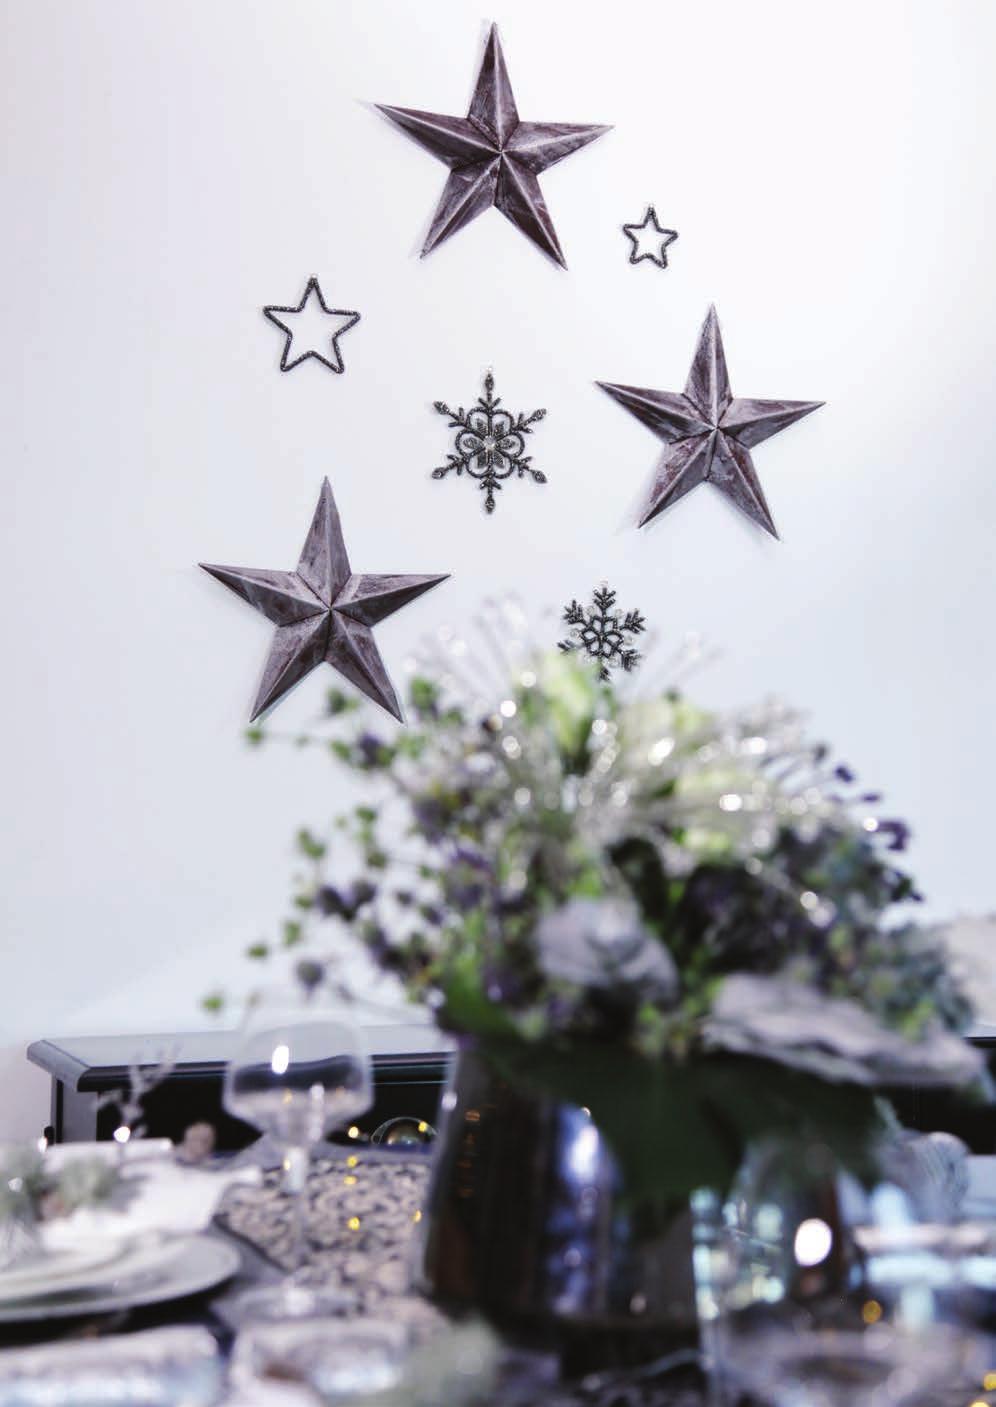 1. 1. BRUSHED SILVER TIN STAR, 2. CHARCOAL BEADED STAR DECORATIONS - SET OF 3, 3. CHARCOAL BEADED FLOWER WITH CRYSTAL, 4.